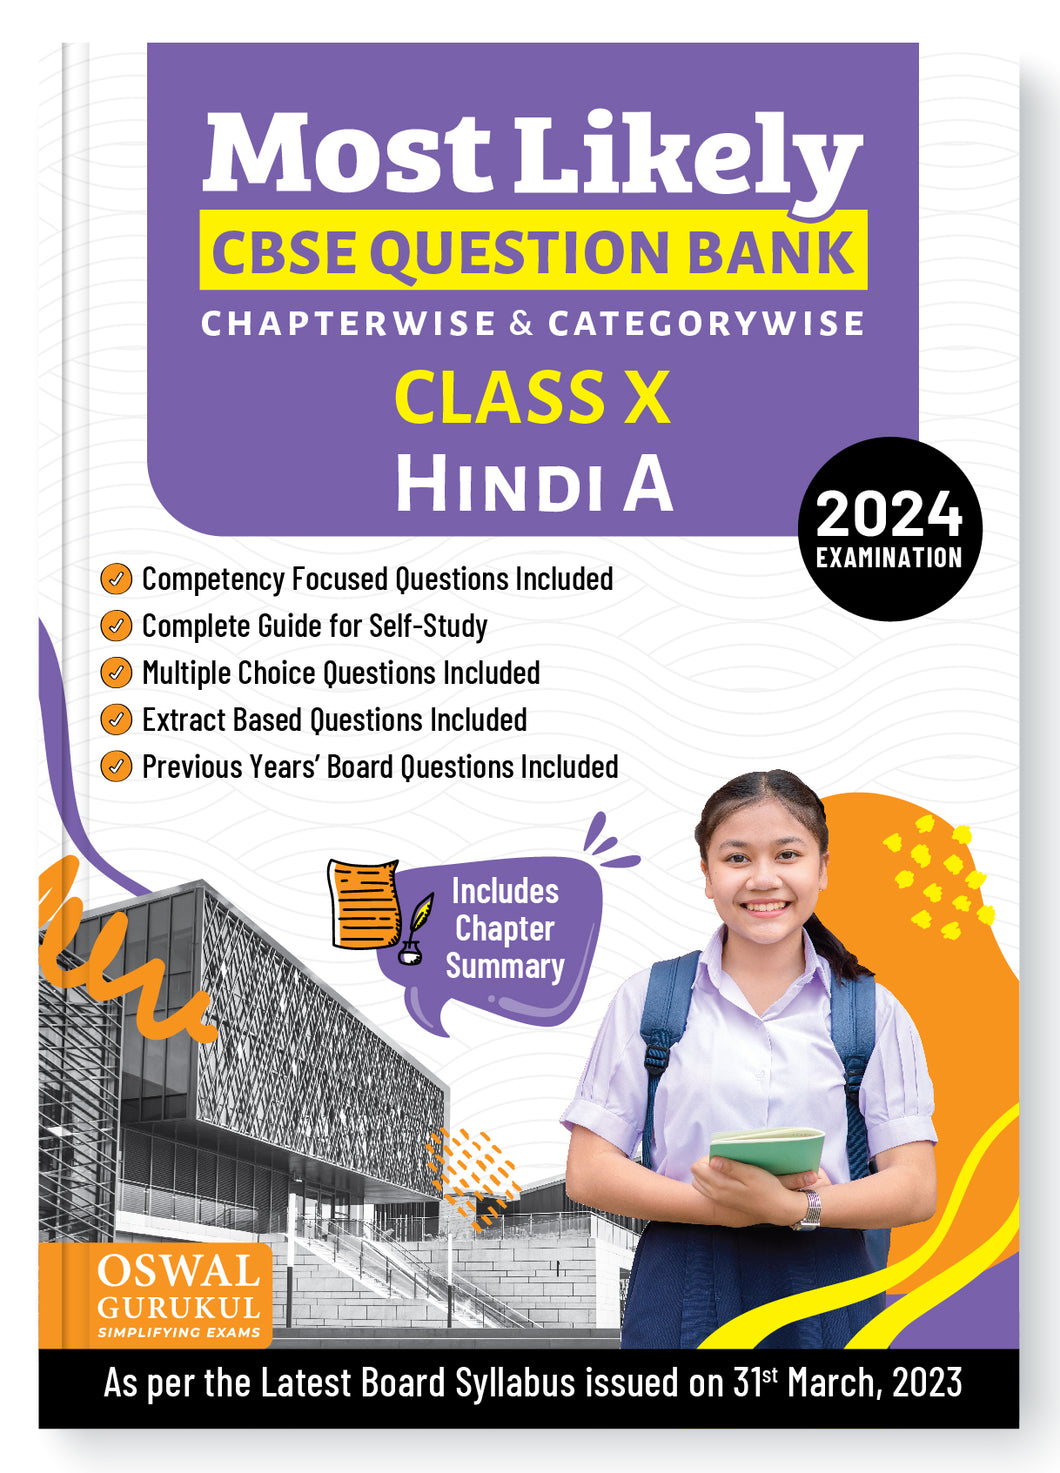 Oswal - Gurukul Hindi-A Most Likely Question Bank : CBSE Class 10 for 2024 Exam